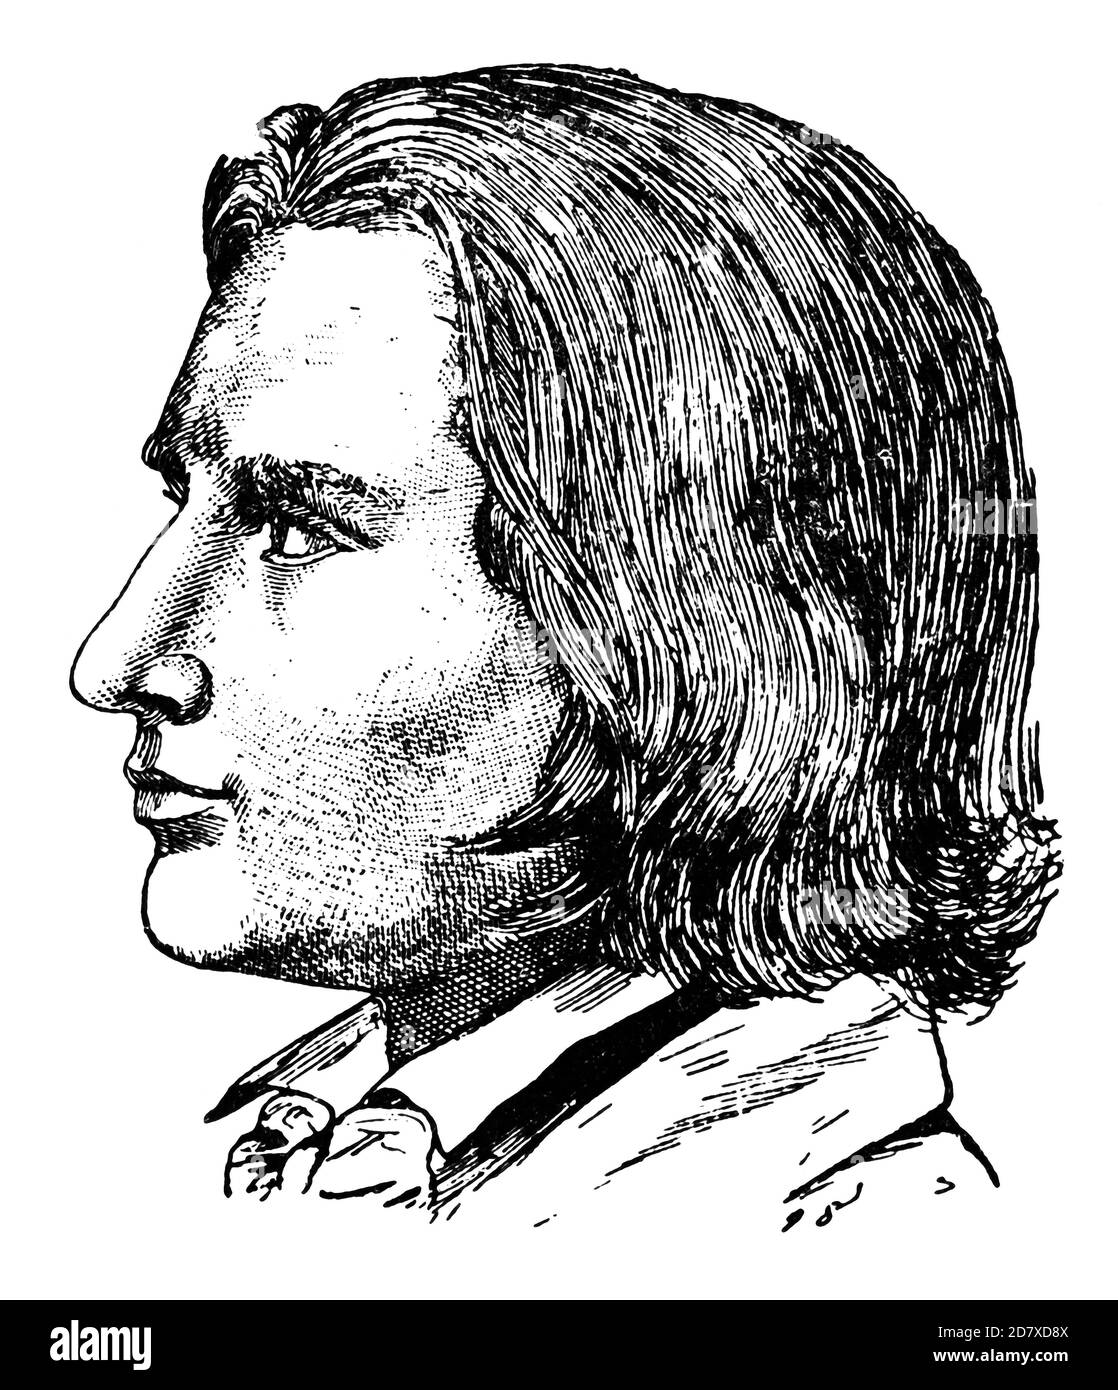 Portrait of Franz Liszt (at the age of 25) - a Hungarian composer, virtuoso pianist, conductor, music teacher, arranger, and organist of the Romantic era. Illustration of the 19th century. White background. Stock Photo